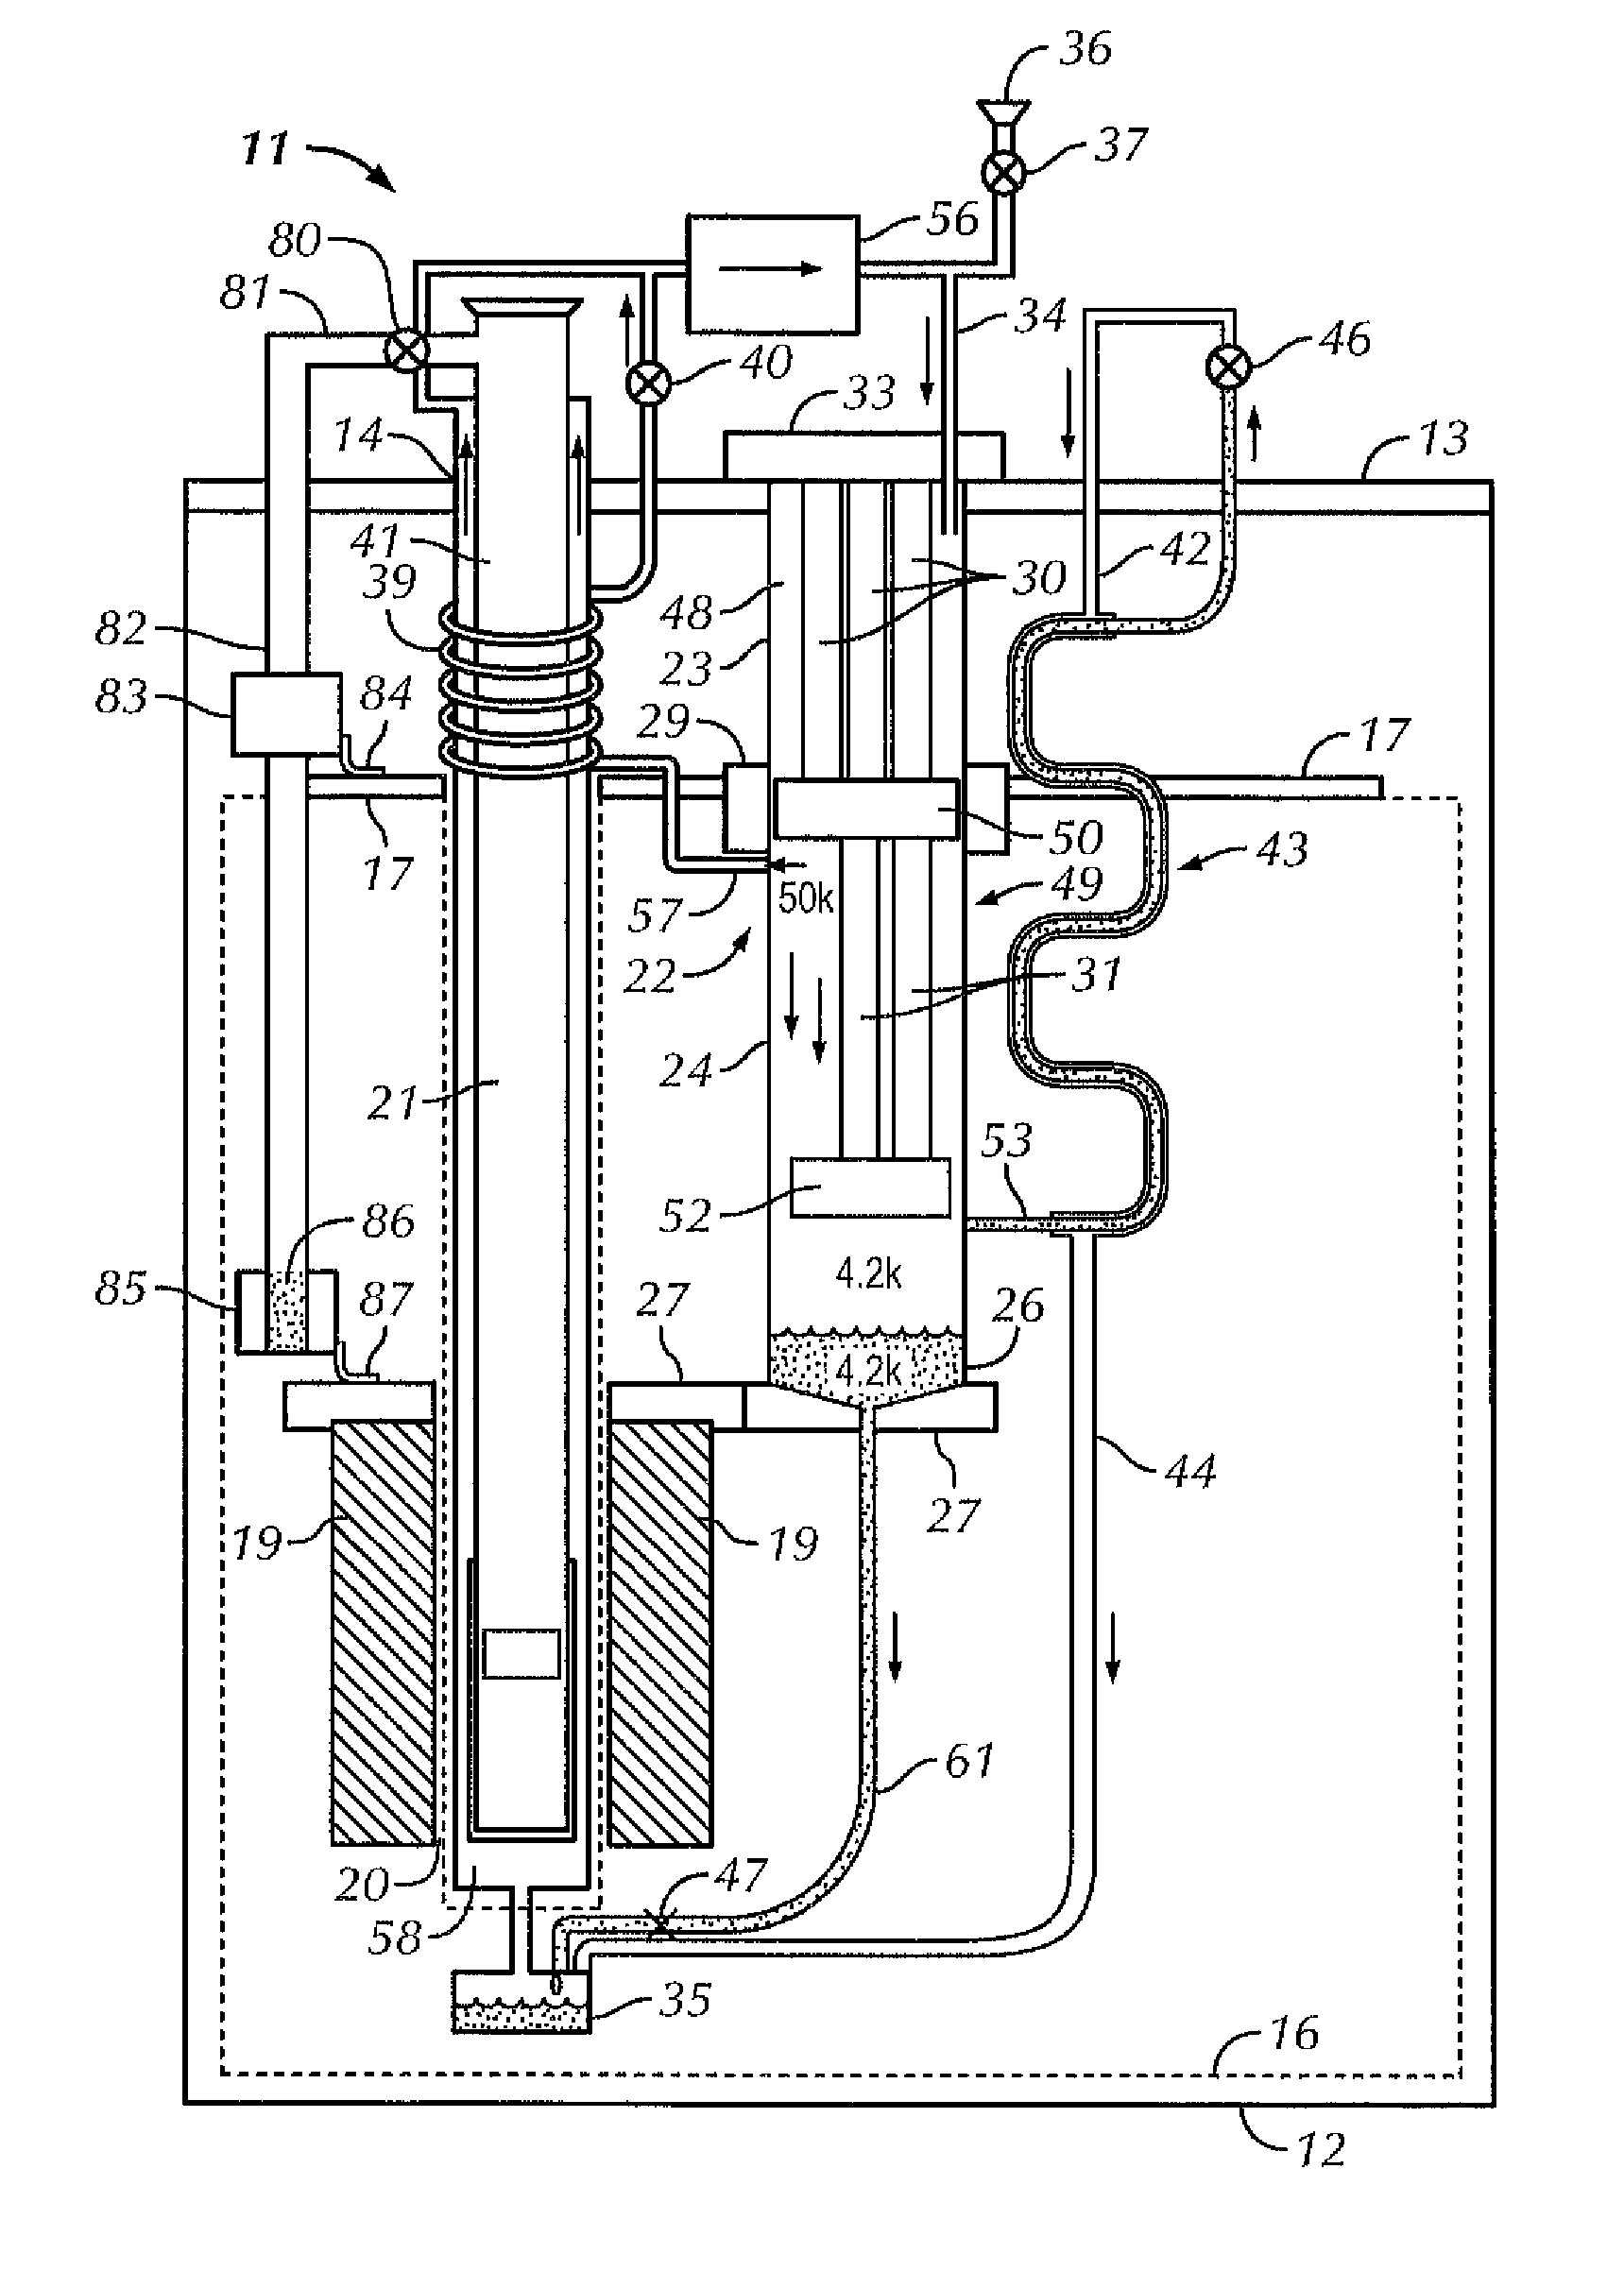 Method and apparatus for controlling temperature in a cryocooled cryostat  using static and moving gas